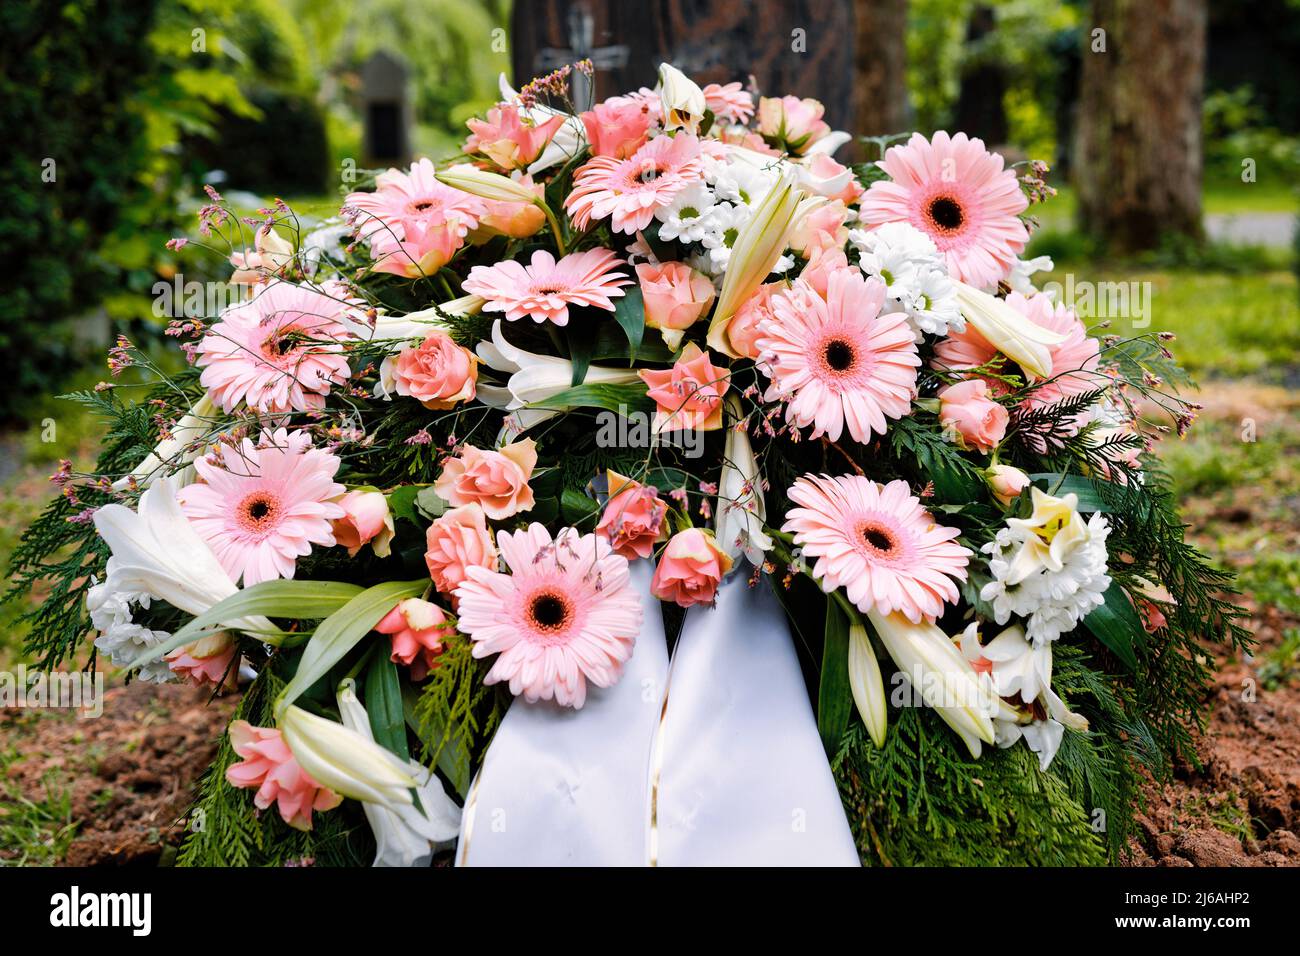 colorful pastel flowers on a grave after a funeral Stock Photo